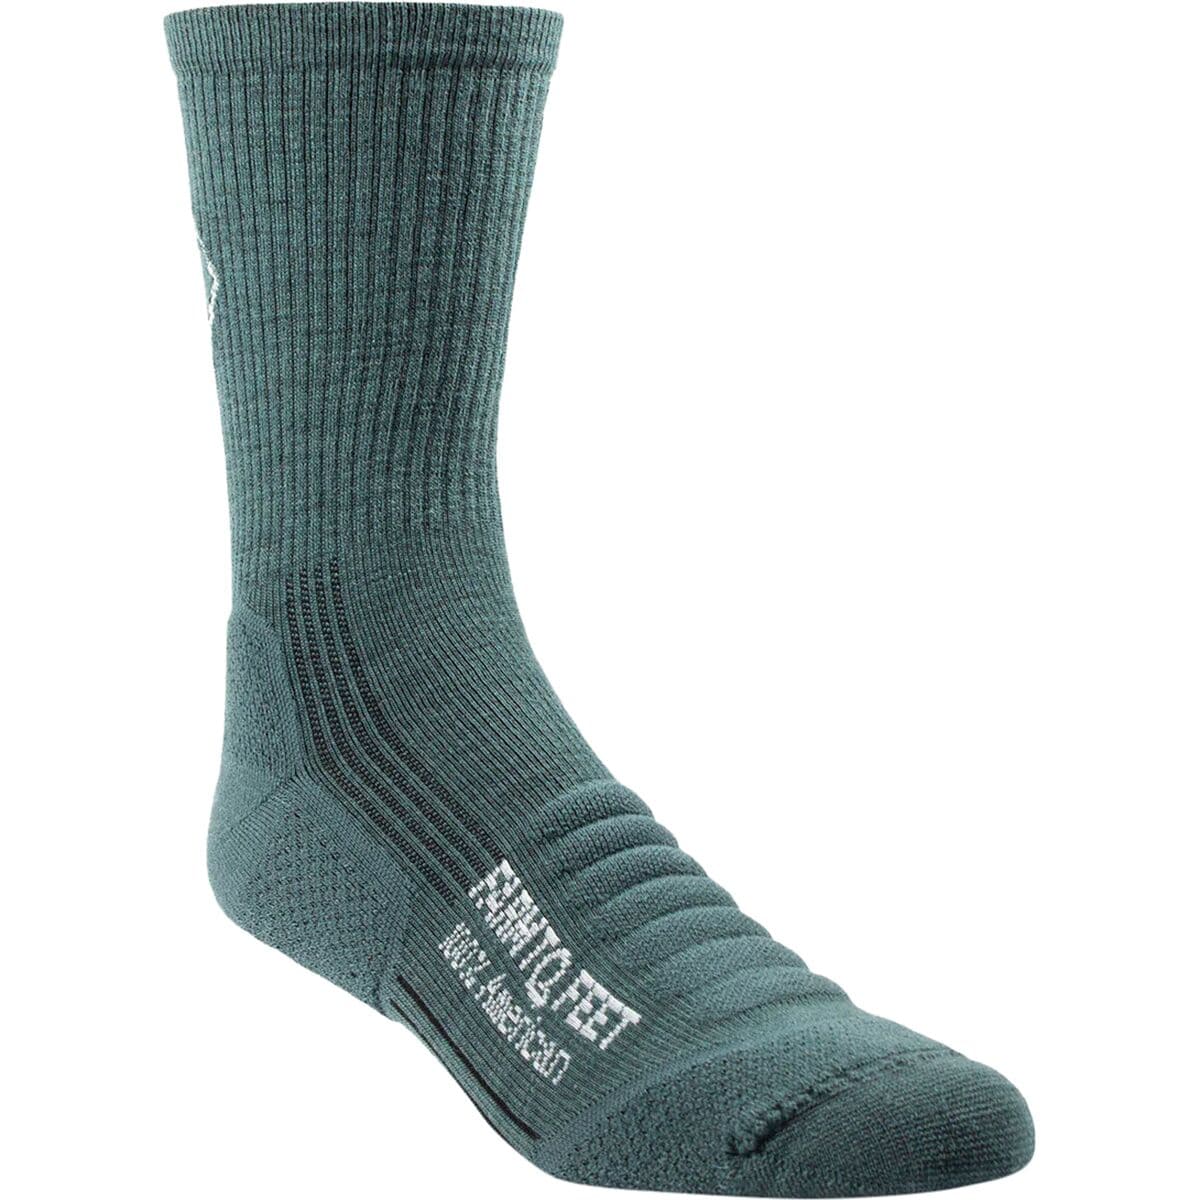 Chester Trail Midweight Hiking Sock - Men